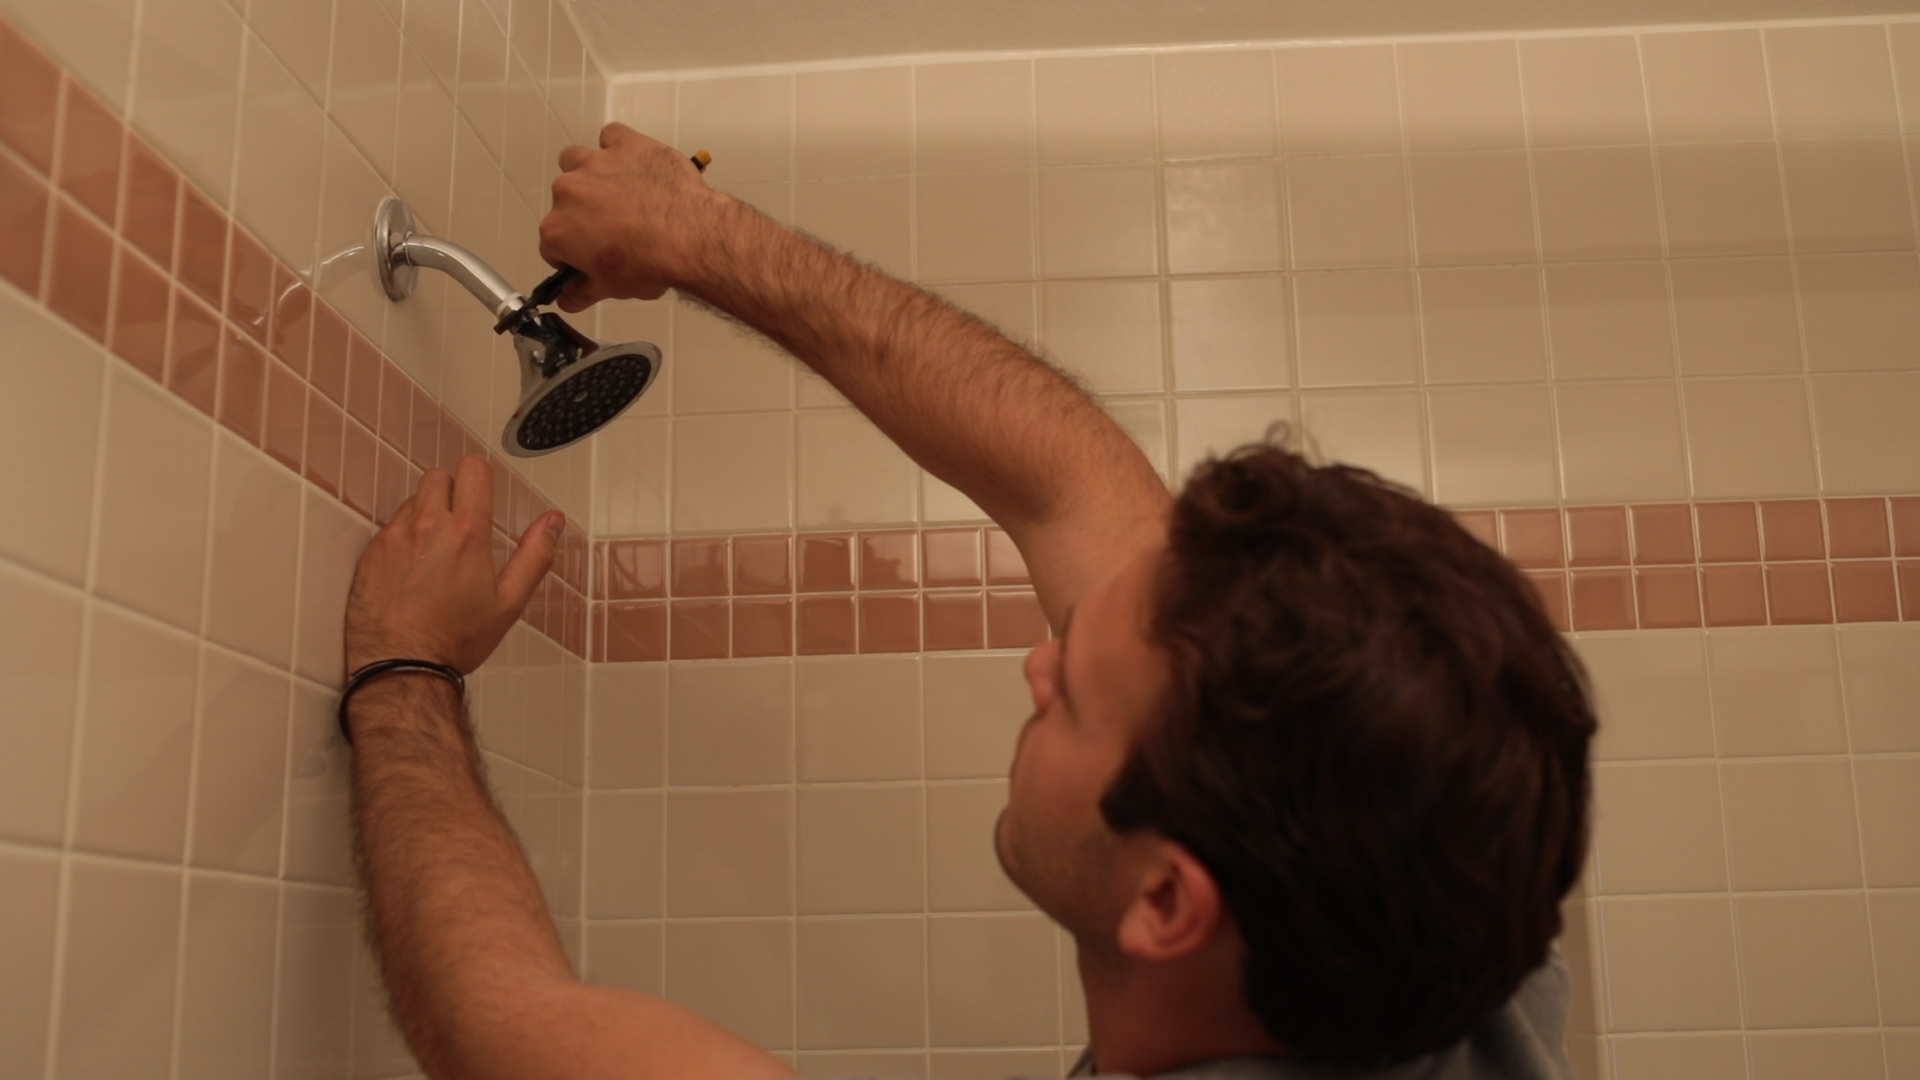 The new showerheads use 1.5 gallons per minute compared to the old ones which used 2.5 gallons per minute.